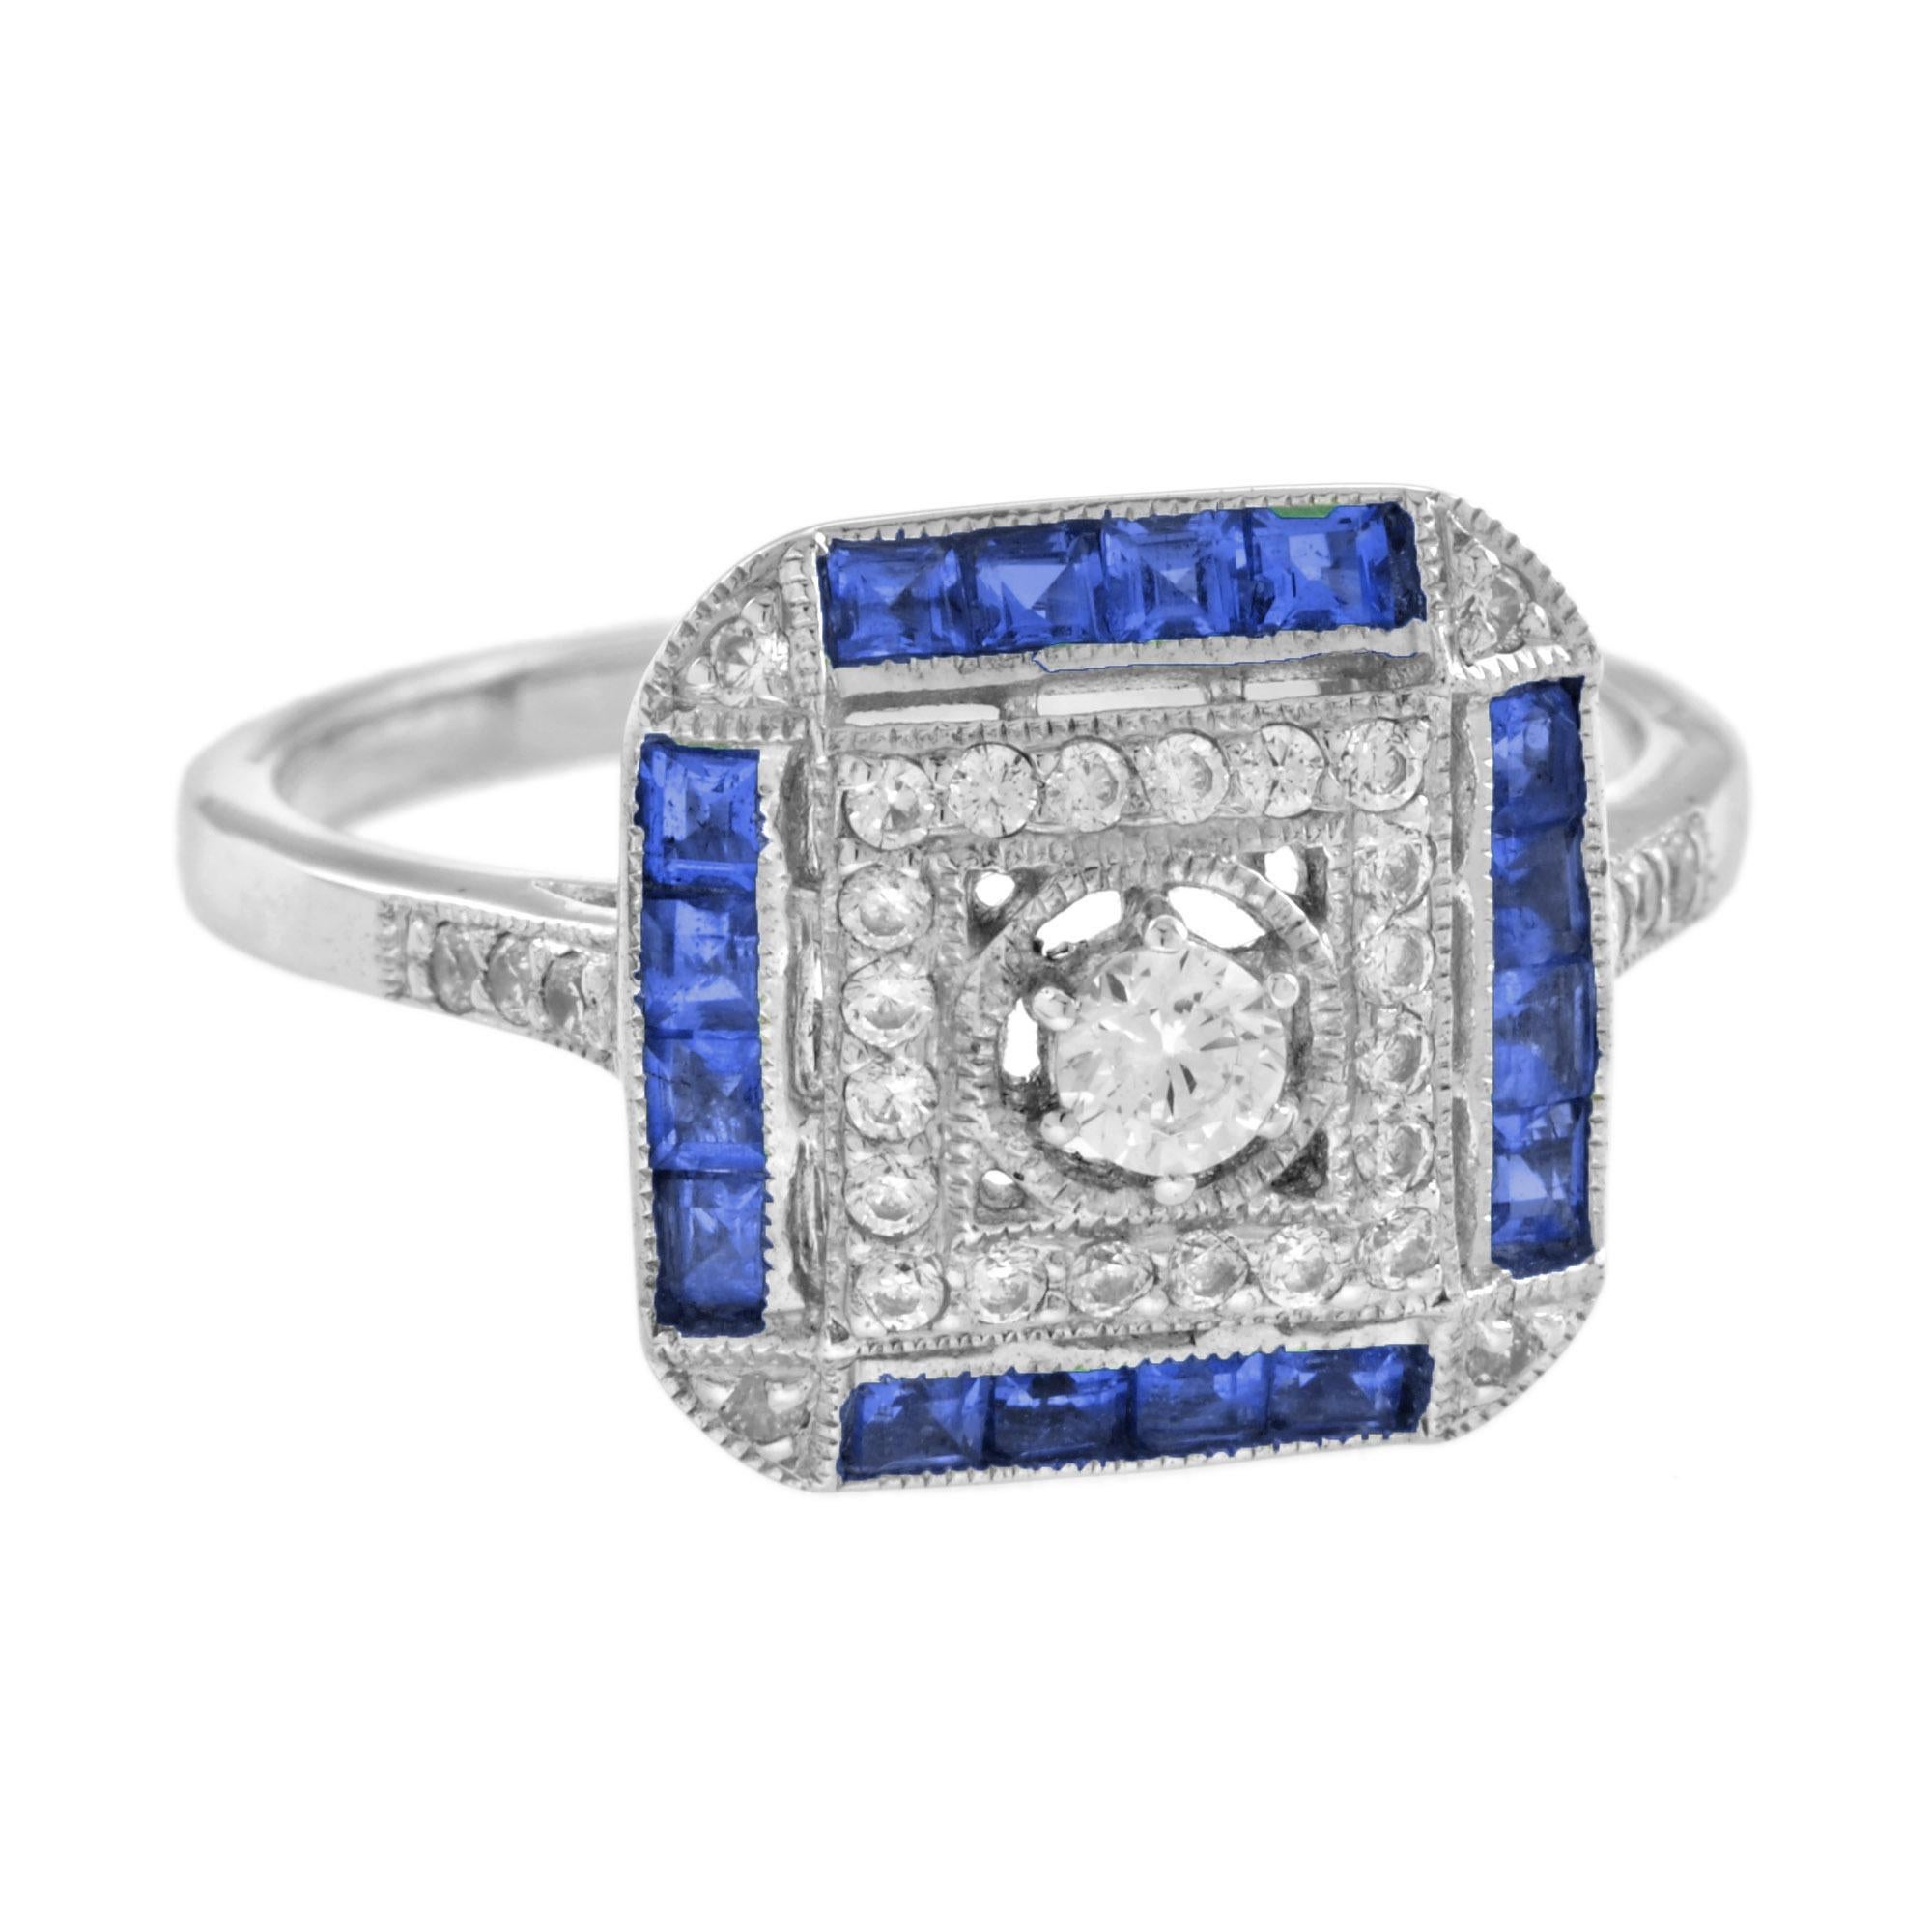 For Sale:  Diamond and Sapphire Art Deco Style Engagement Ring in 14K White Gold 2